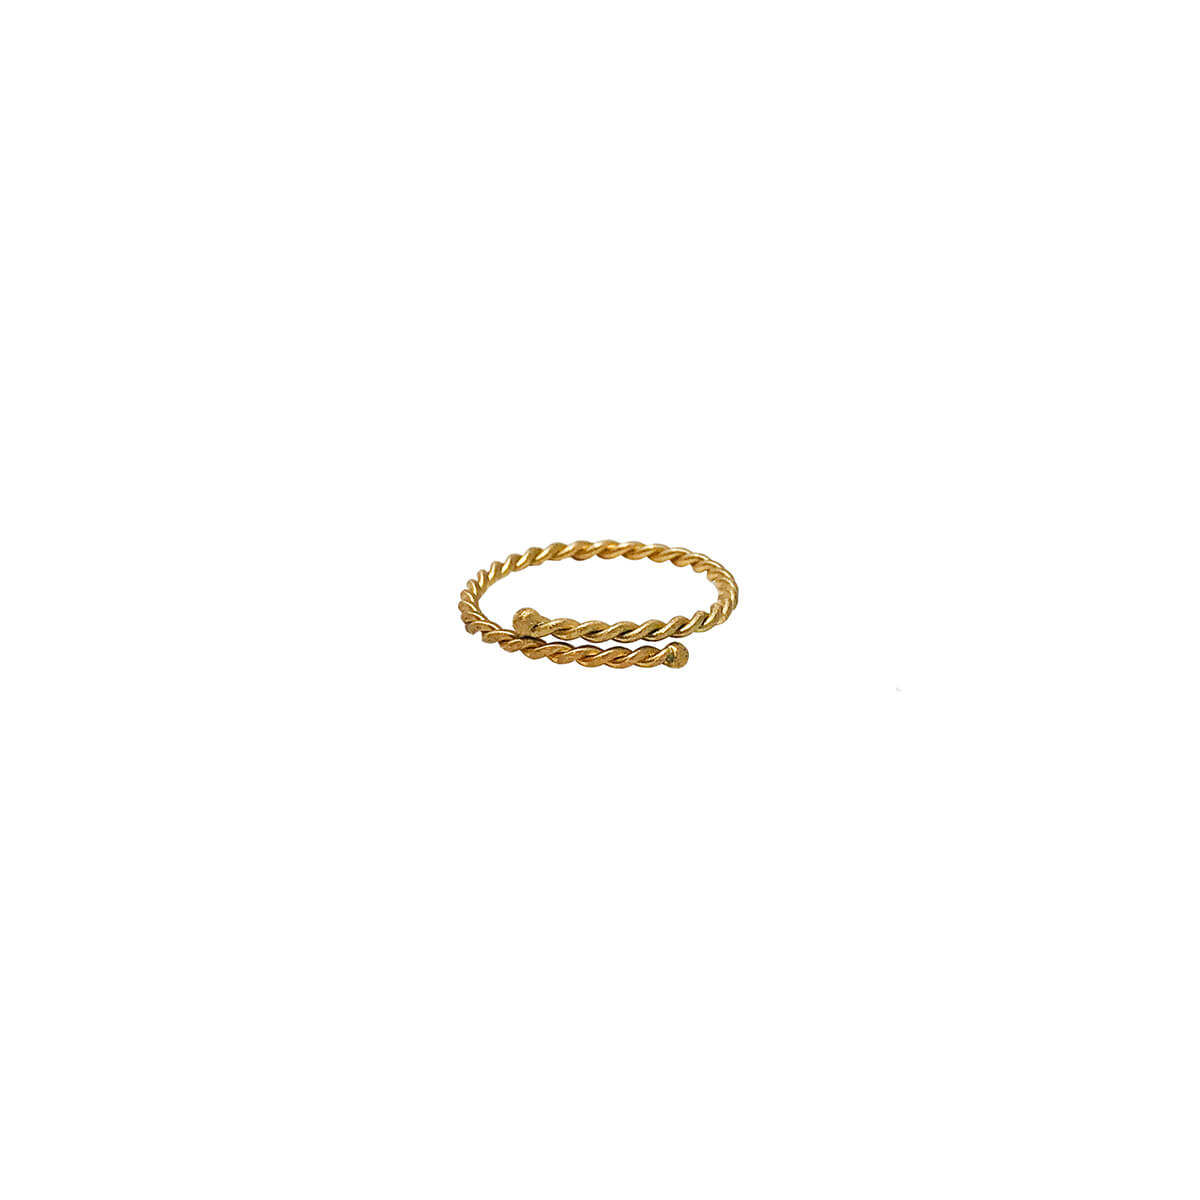 Image of the gold Twisted Stacking Ring, on a white background.